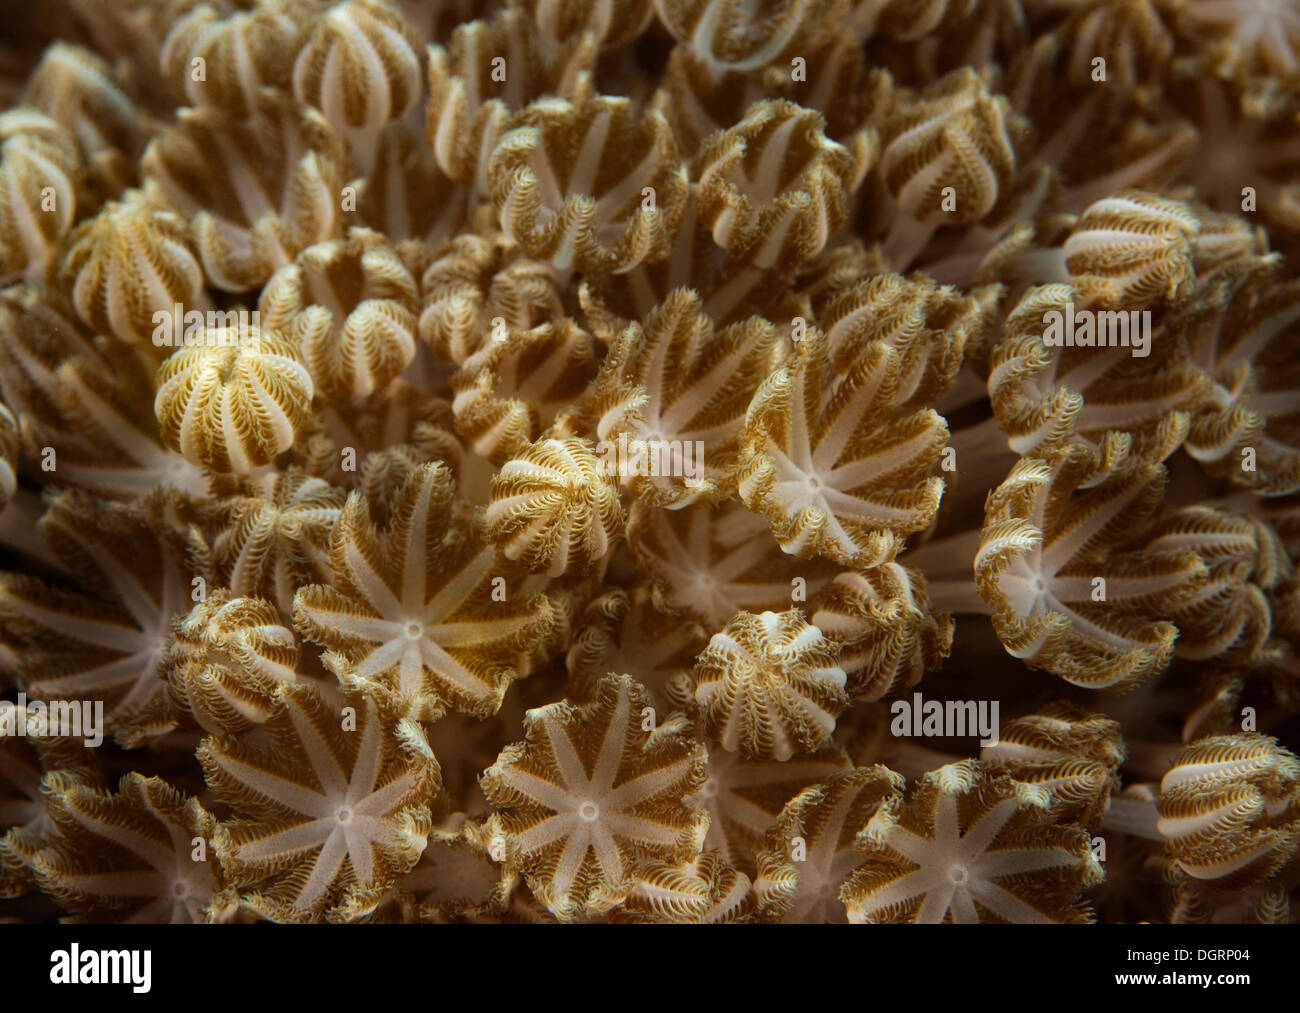 Pulsating Xenid (Heteroxenia fuscescens), Limasawa, -, Southern Leyte, Philippines Stock Photo